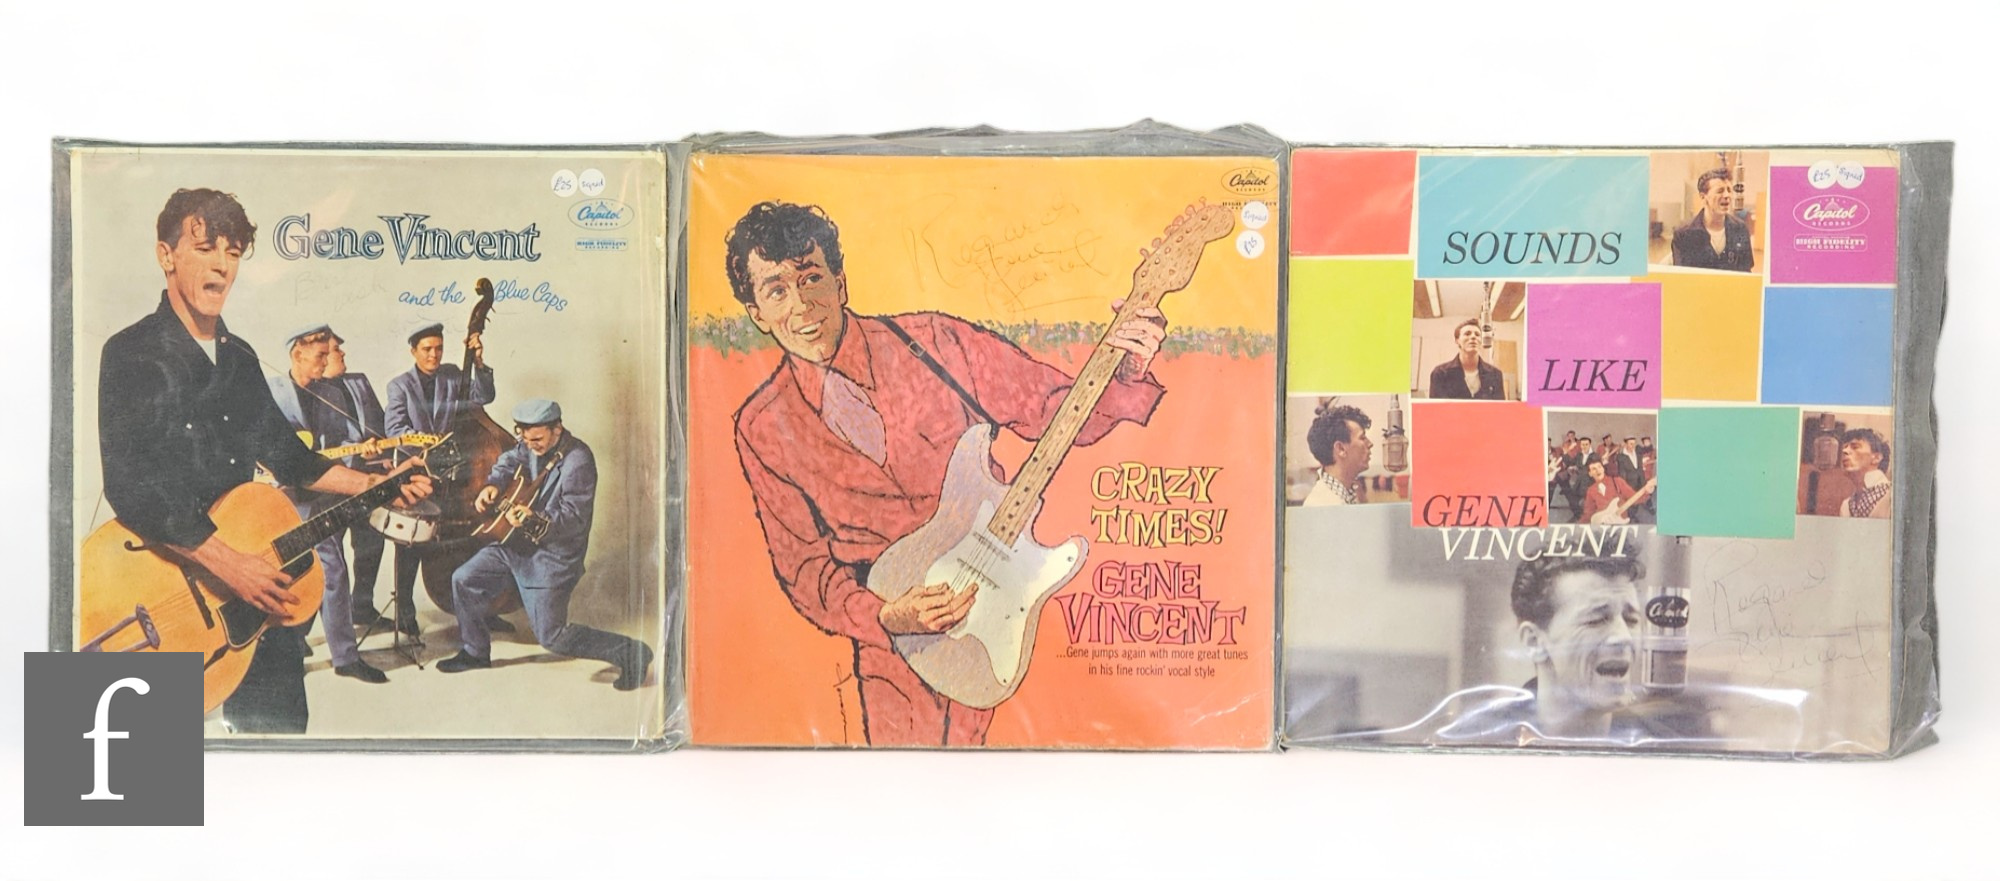 Gene Vincent - Three signed copies of albums, Sounds Like Gene Vincent, Crazy Times and Gene Vincent - Image 2 of 2